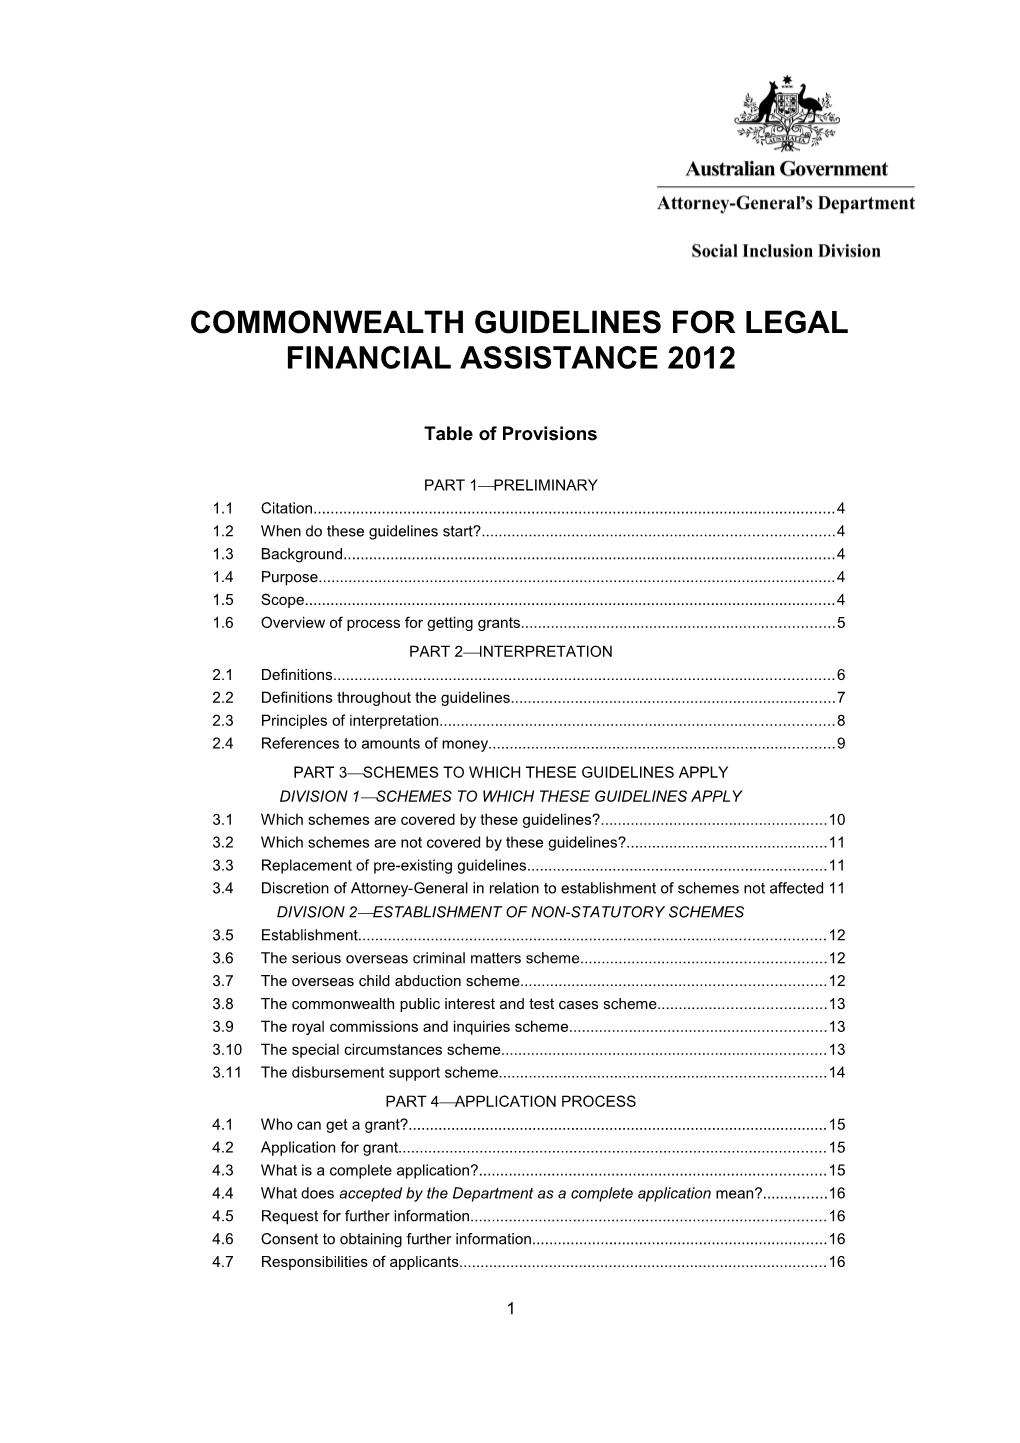 Commonwealth Guidelines for Legal Financial Assistance 2012